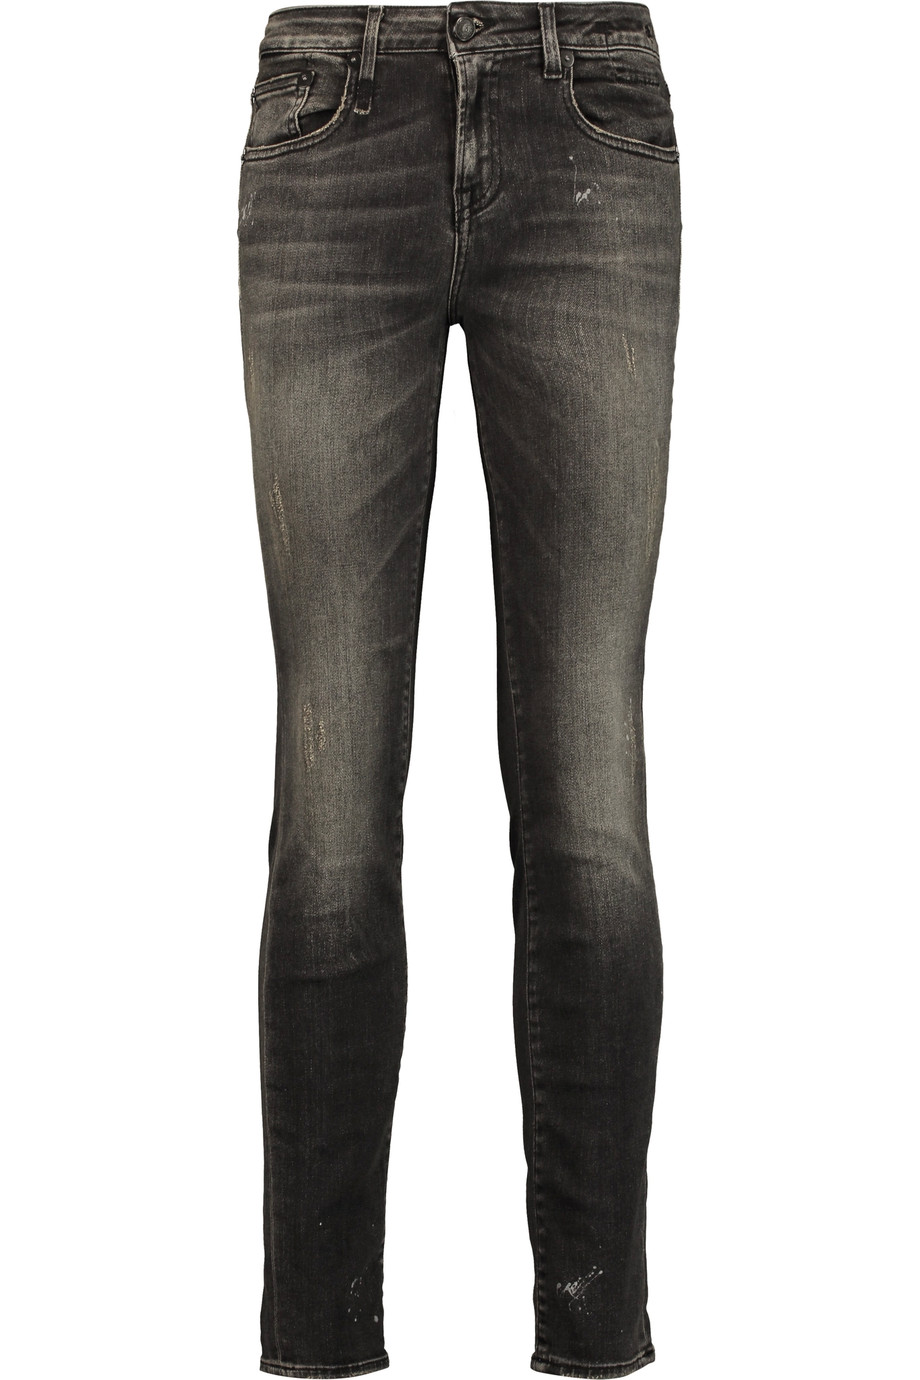 R13 Alison Distressed Mid-rise Skinny Jeans | ModeSens